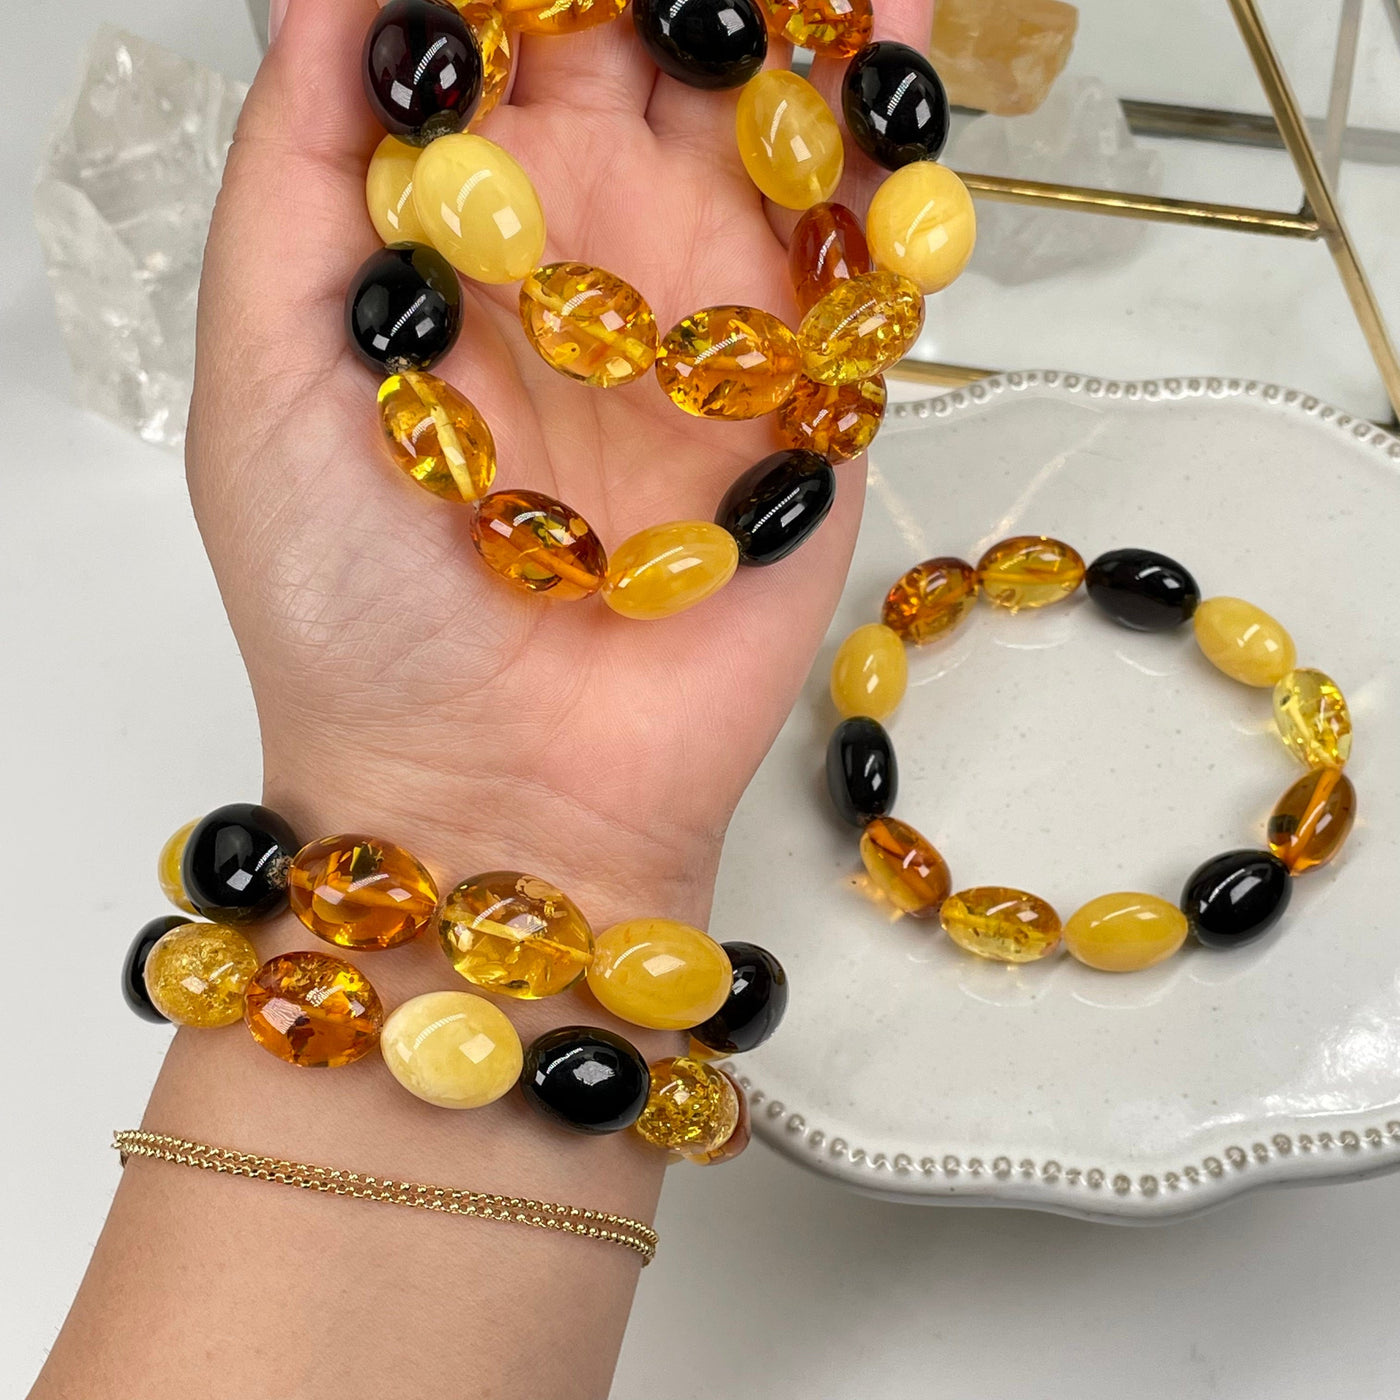 oval bead bracelets made of different toned amber beads in hand for size reference 